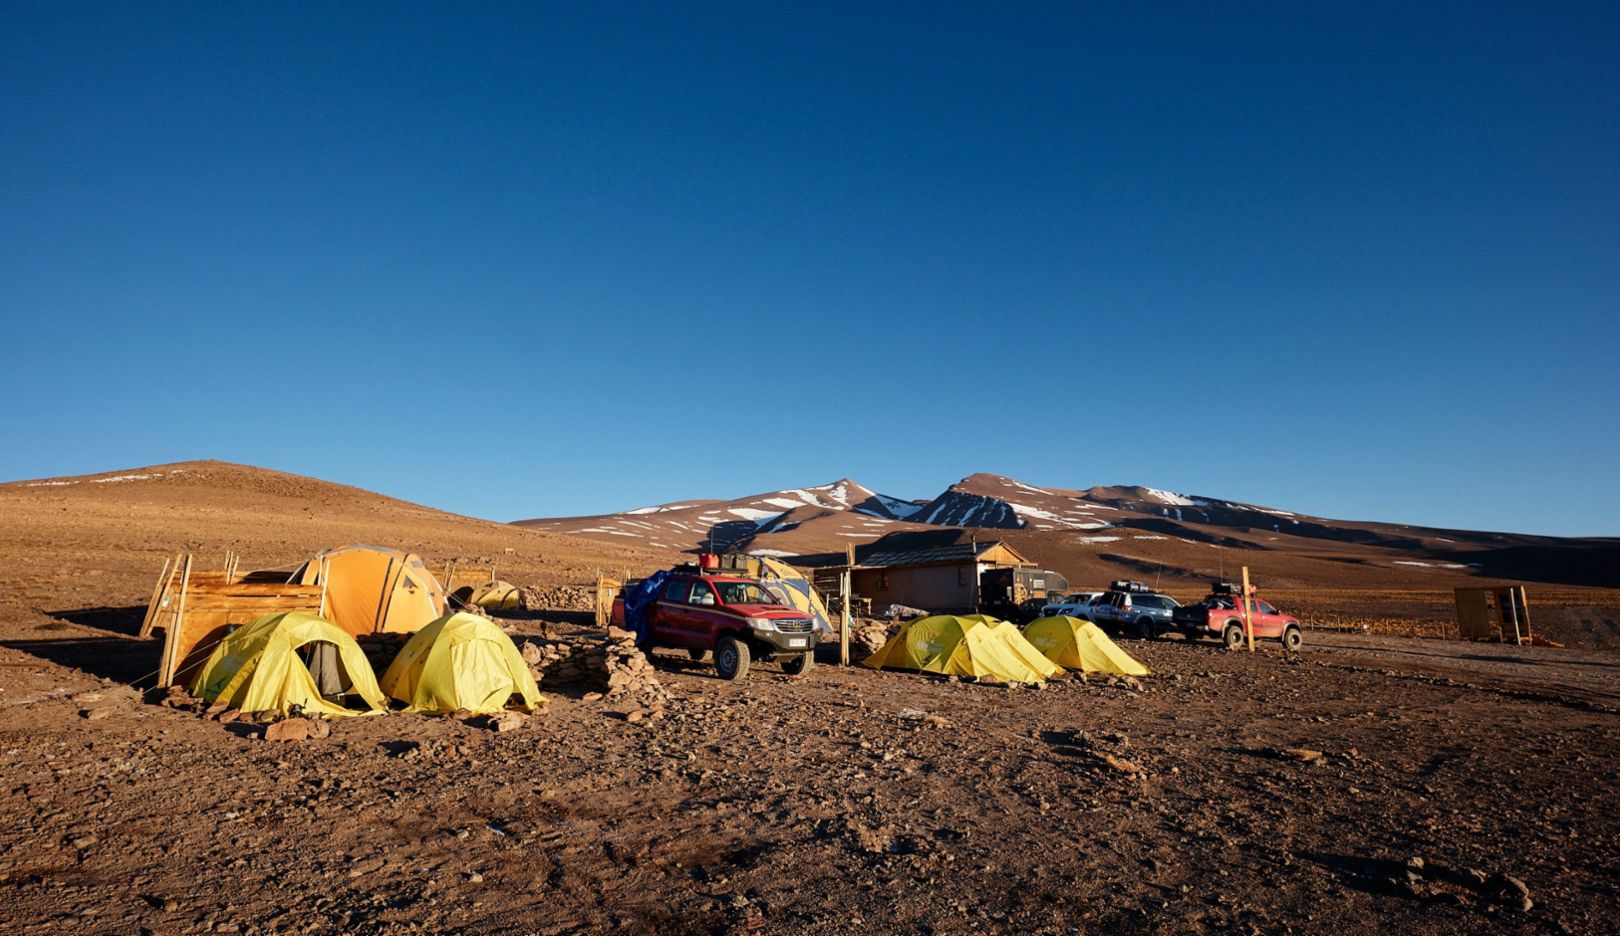 Camping in a vast expanse: The team’s base camp.